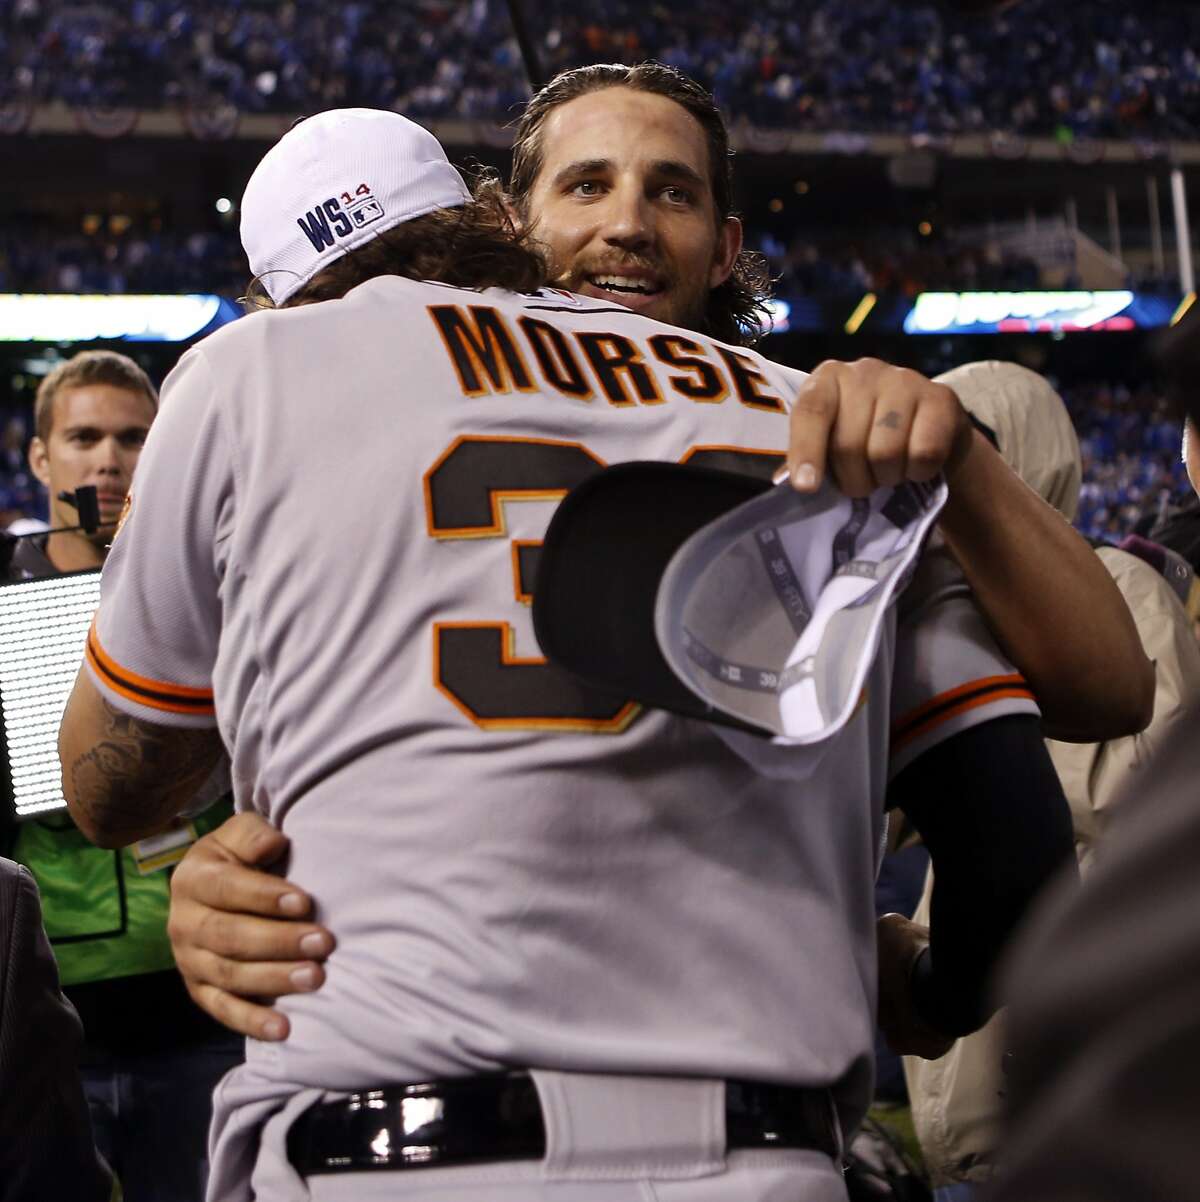 San Francisco Giants' Madison Bumgarner and Michael Morse hug after Game 7 of the World Series at Kauffman Stadium on Wednesday, Oct. 29, 2014 in Kansas City, Mo.